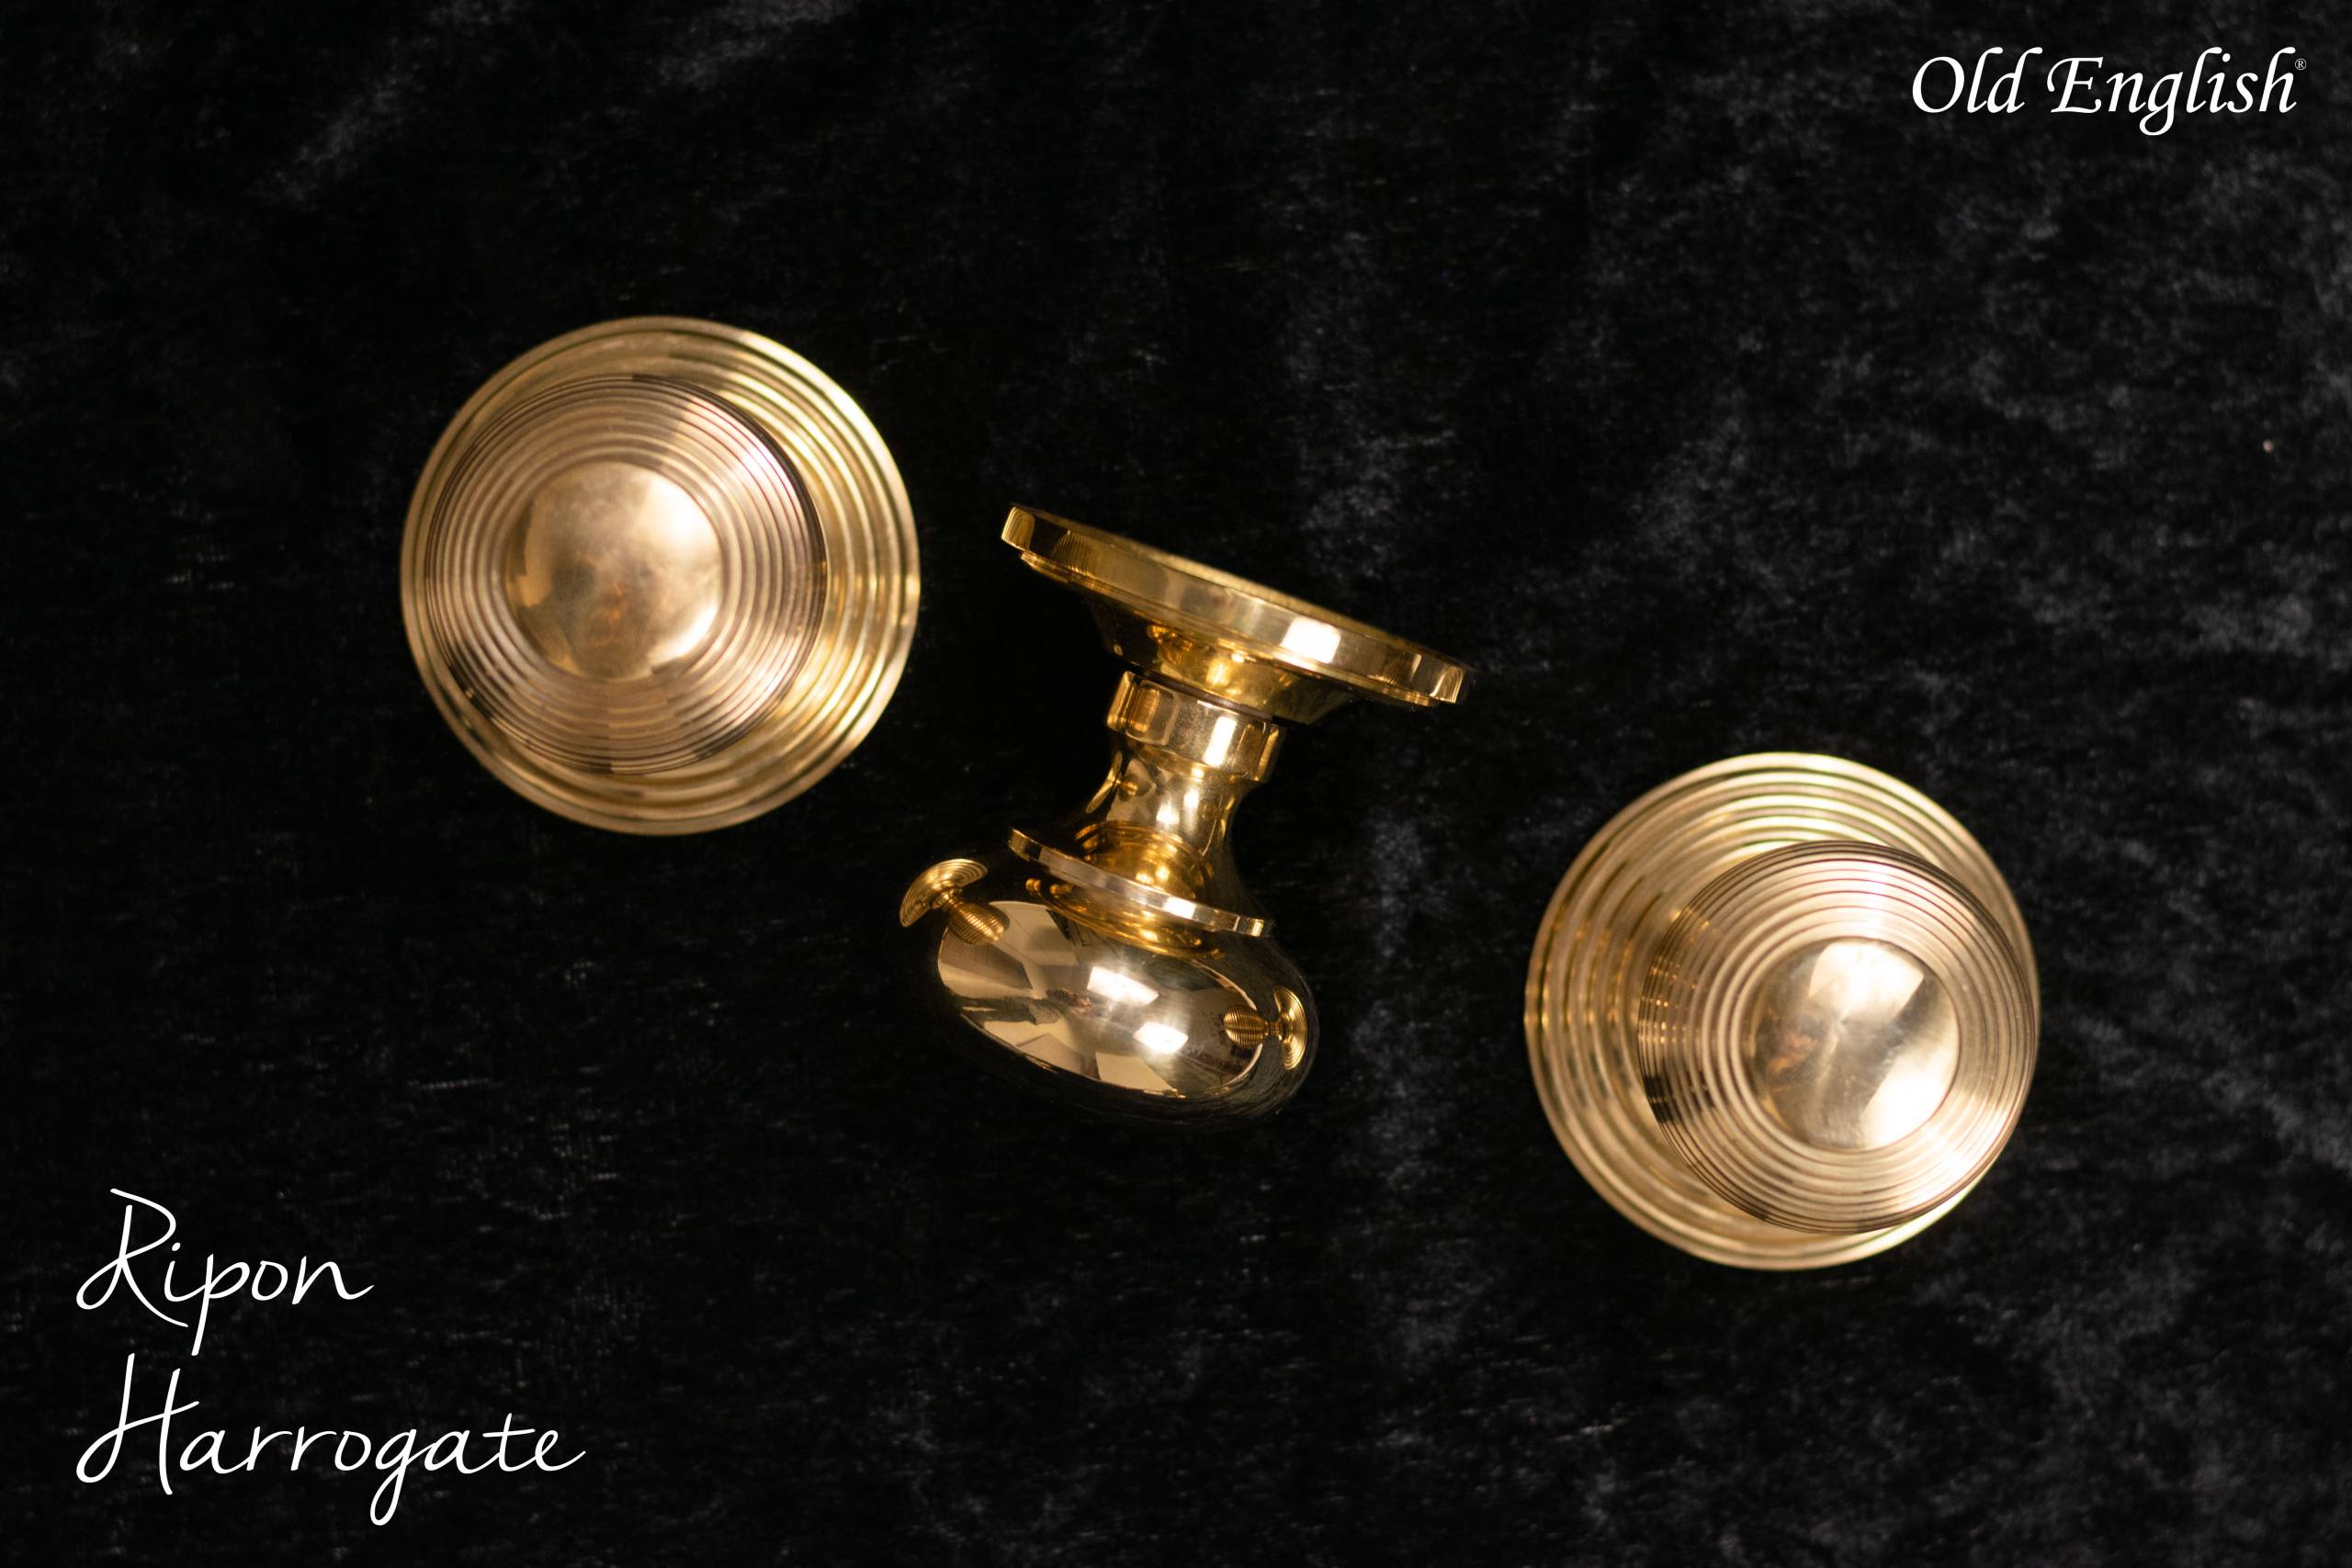 NEW UNLACQUERED BRASS PRODUCTS!